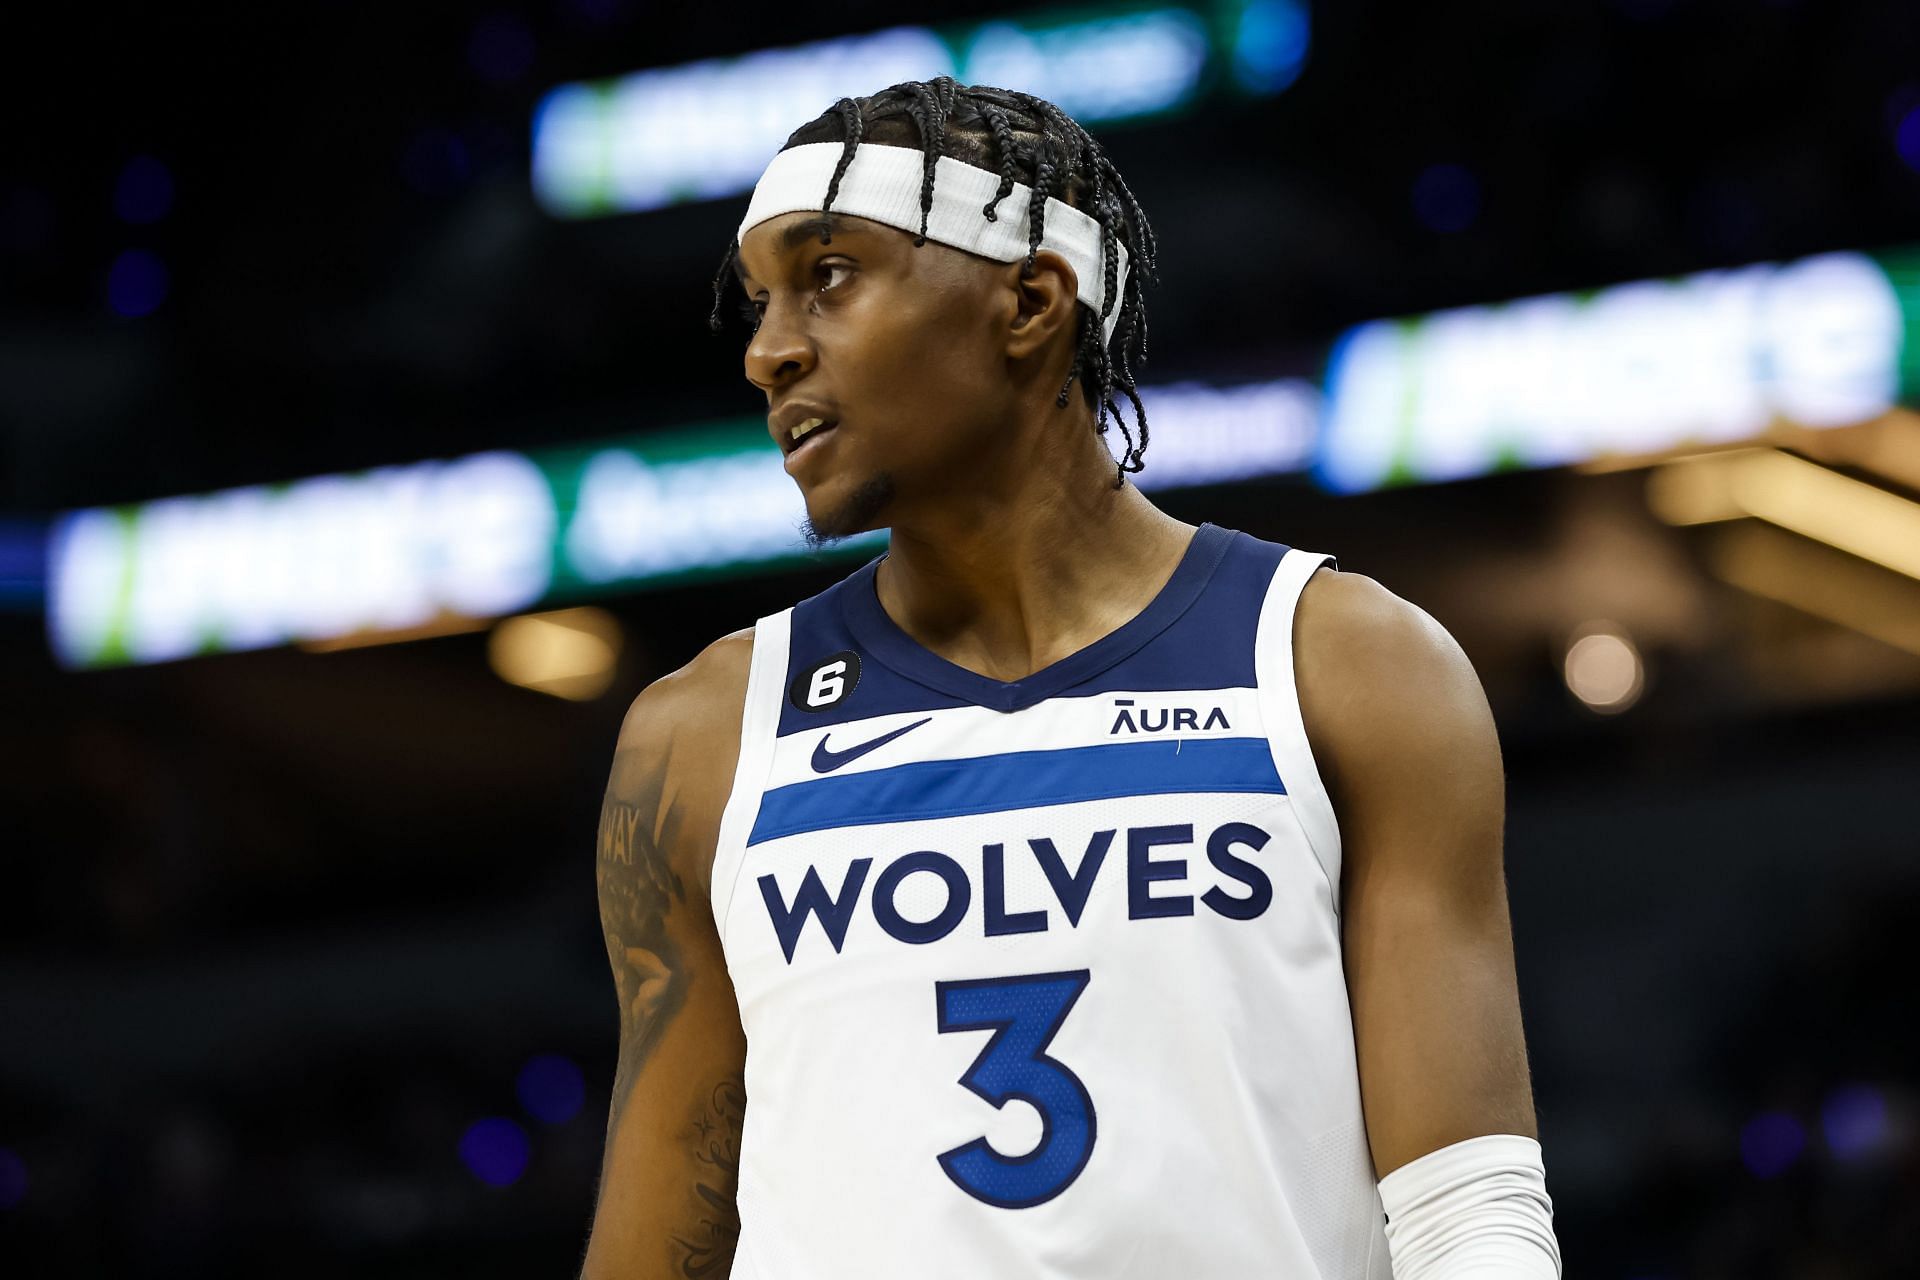 Report: Wolves forward Jaden McDaniels has grown 2 inches - Sports